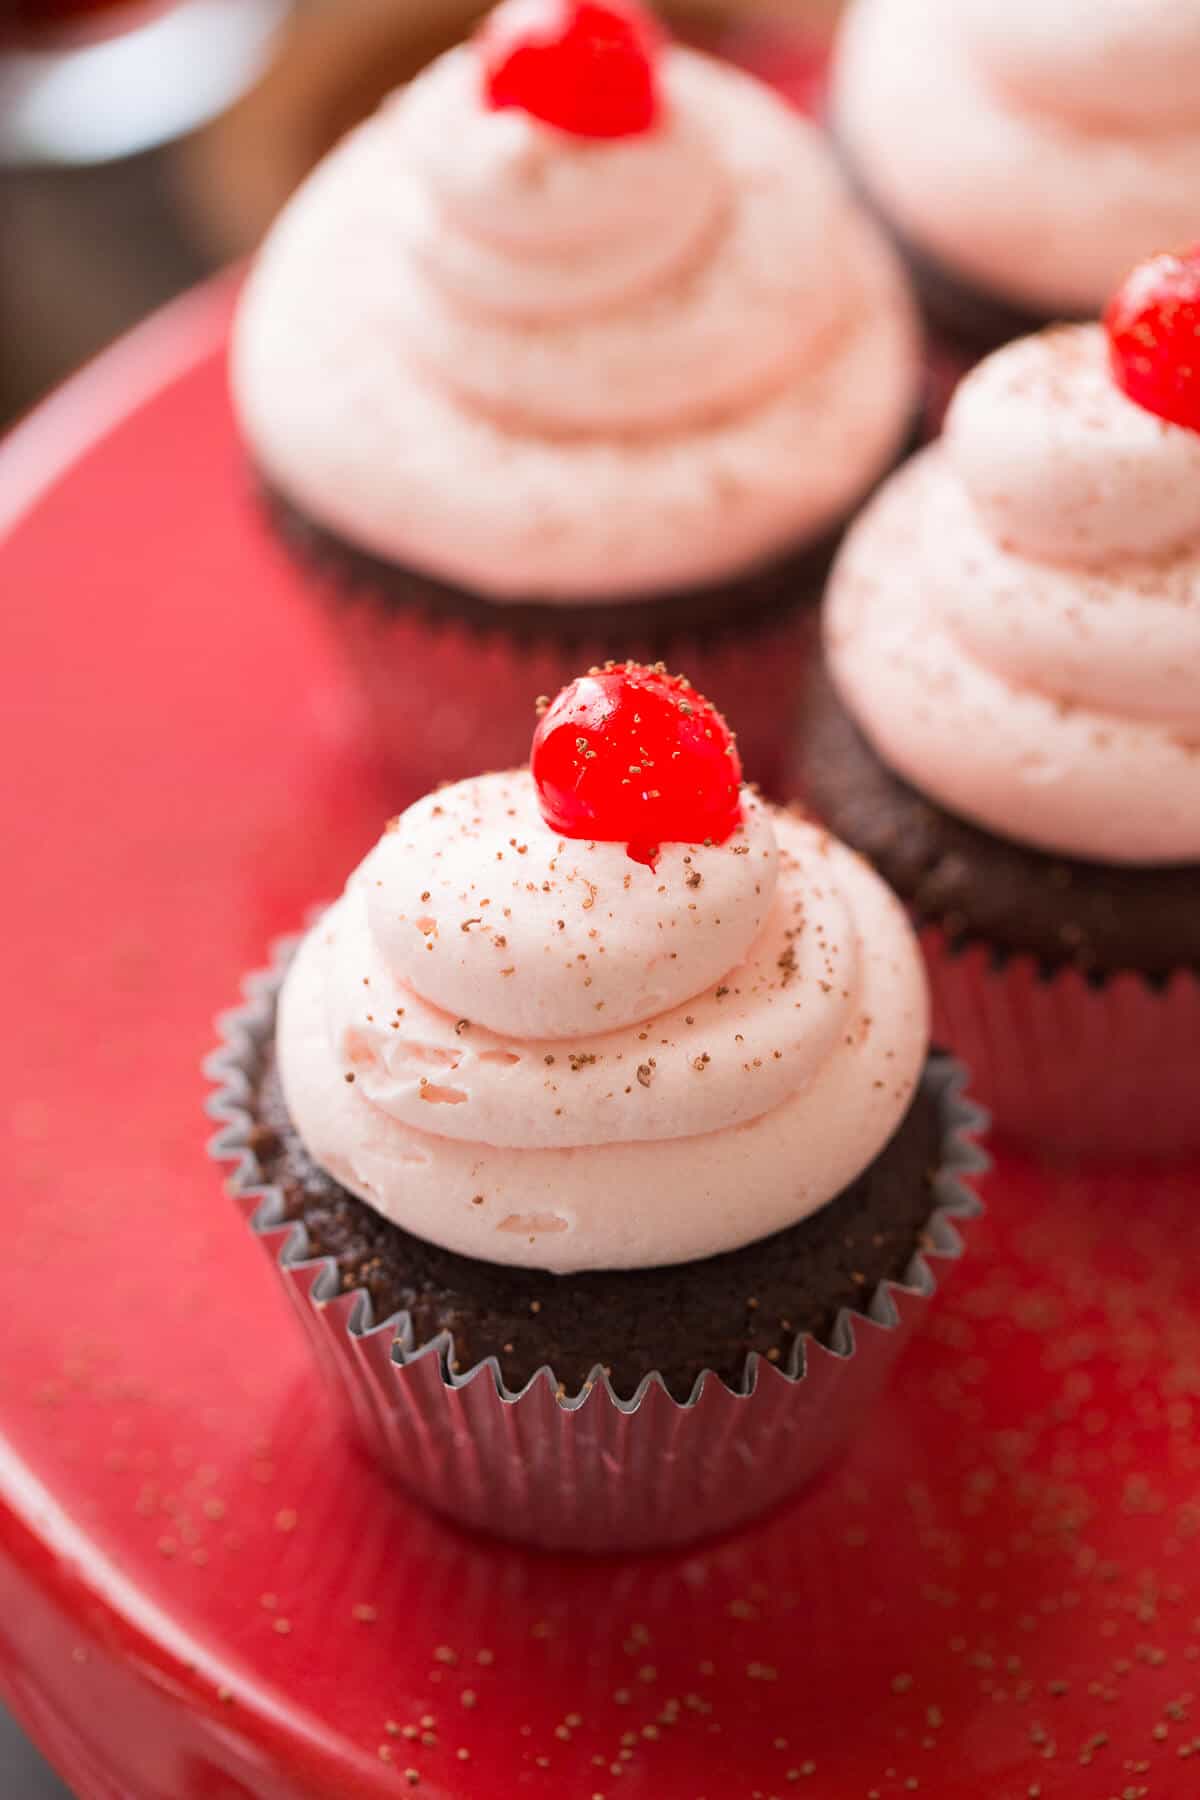 These Cherry Coke cupcakes start with soda infused chocolate cake that gets topped with an ultra creamy cherry buttercream! Each bite is pure delight!